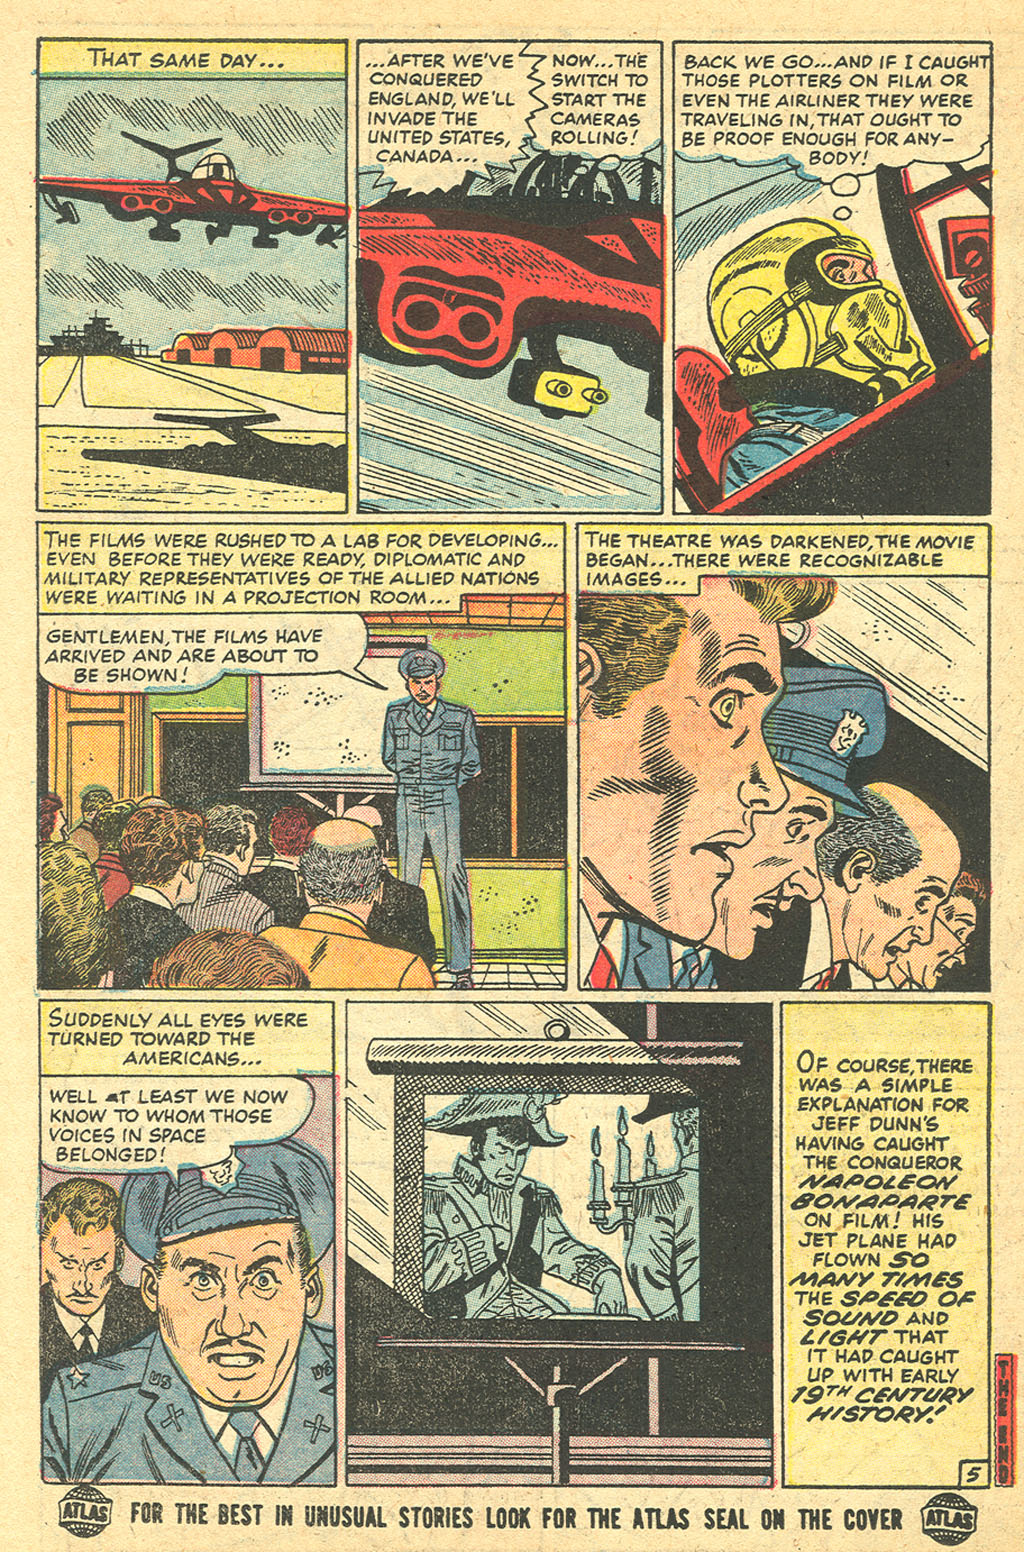 Marvel Tales (1949) 139 Page 13